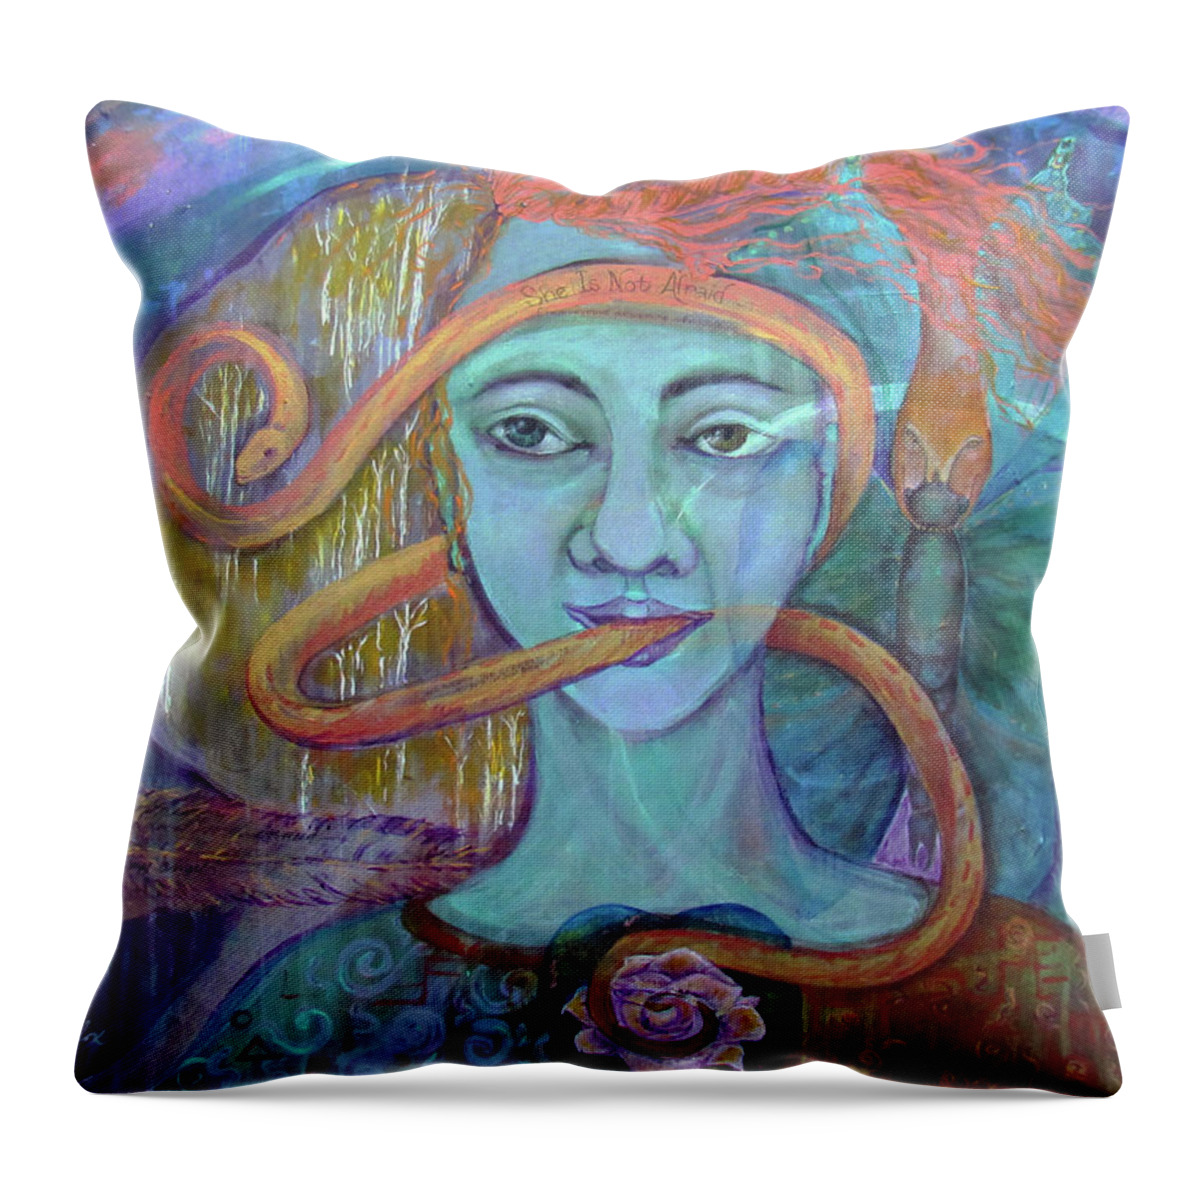 Shamanic Painting. Visionary Painting. Snake Symbolism Throw Pillow featuring the painting She Is Not Afraid of Transformation by Feather Redfox